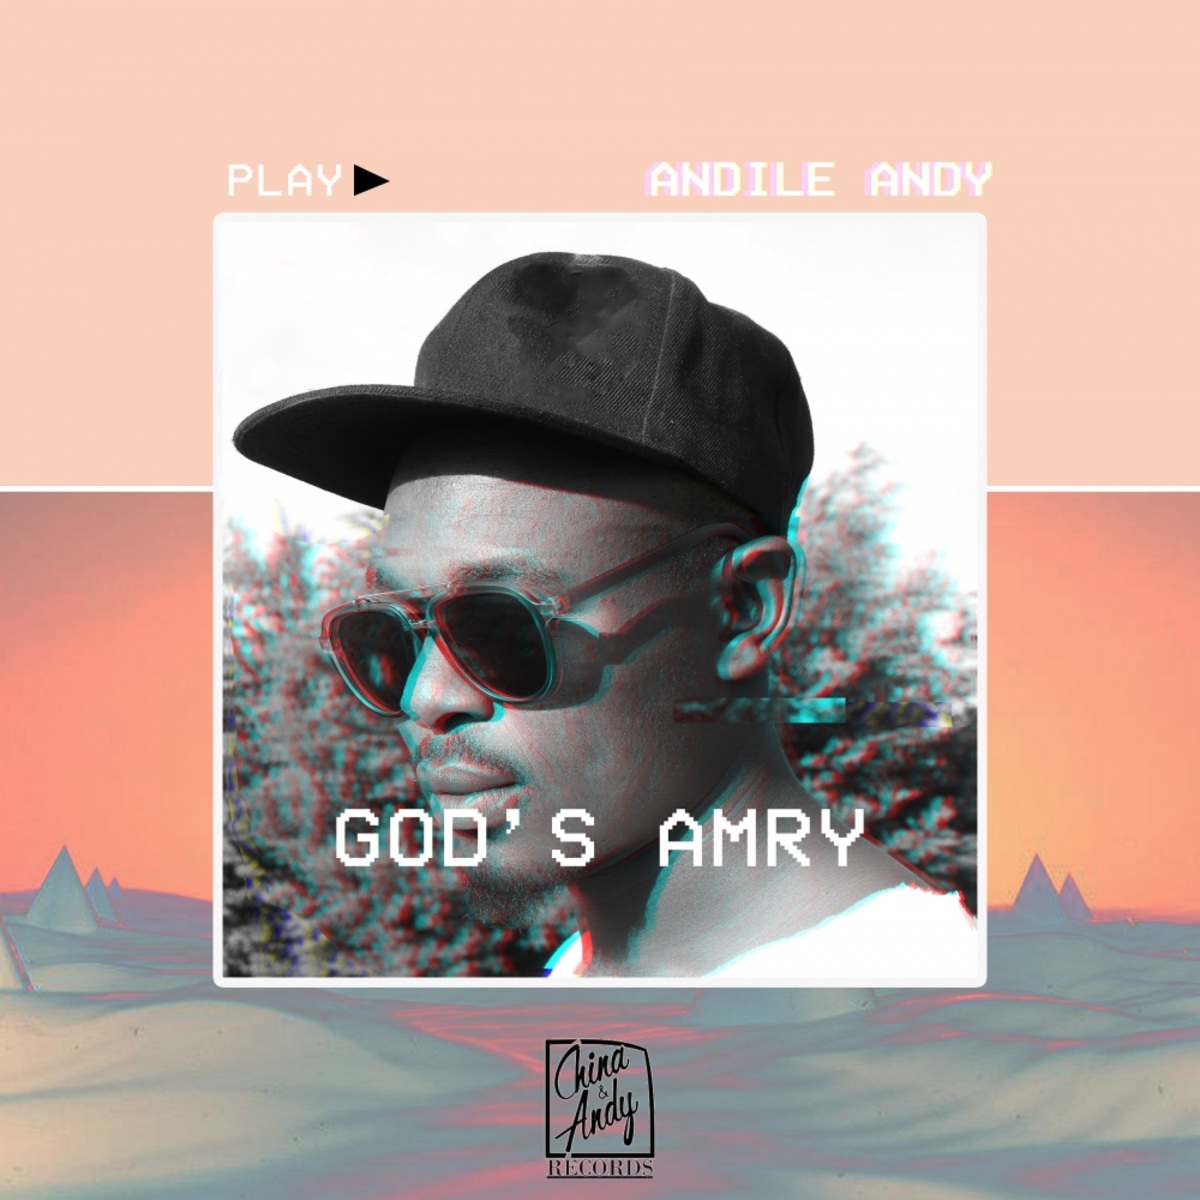 AndileAndy - Gods Army / China & Andy Records